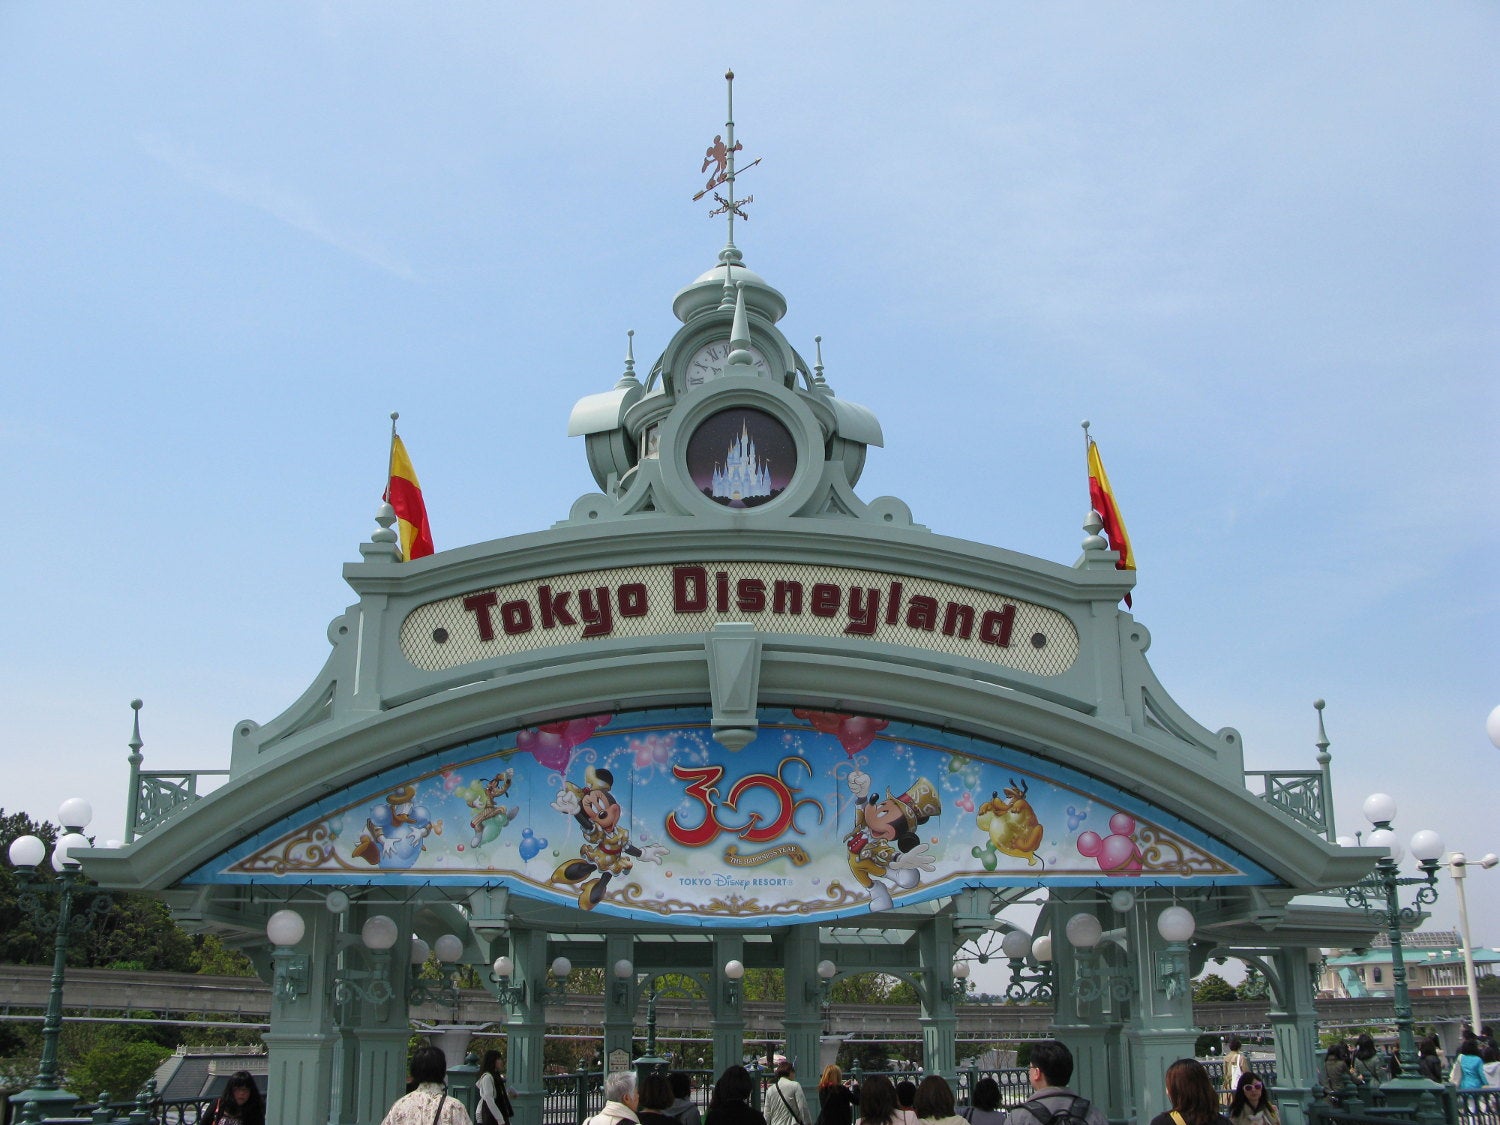 Tokyo Disneyland & Disneysea Theme Parks Will Be Closed Until March 15 Due to Coronavirus Fears - WORLD OF BUZZ